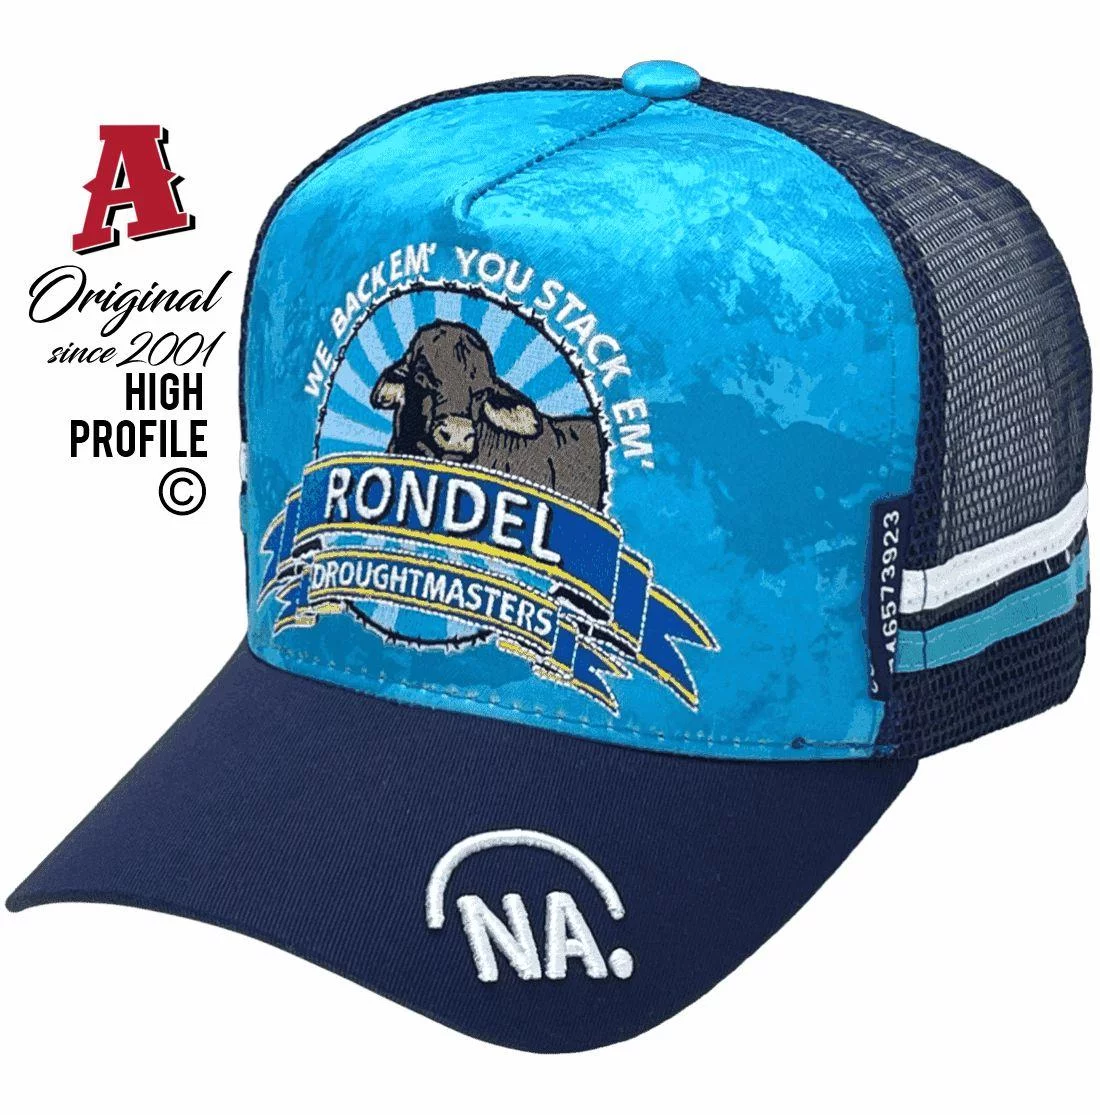 Rondel Droughtmasters WINTON QLD Midrange Aussie Trucker Hats with Sublimated Print Crown & 2 SideBands Camouflage Sky Navy Snapback